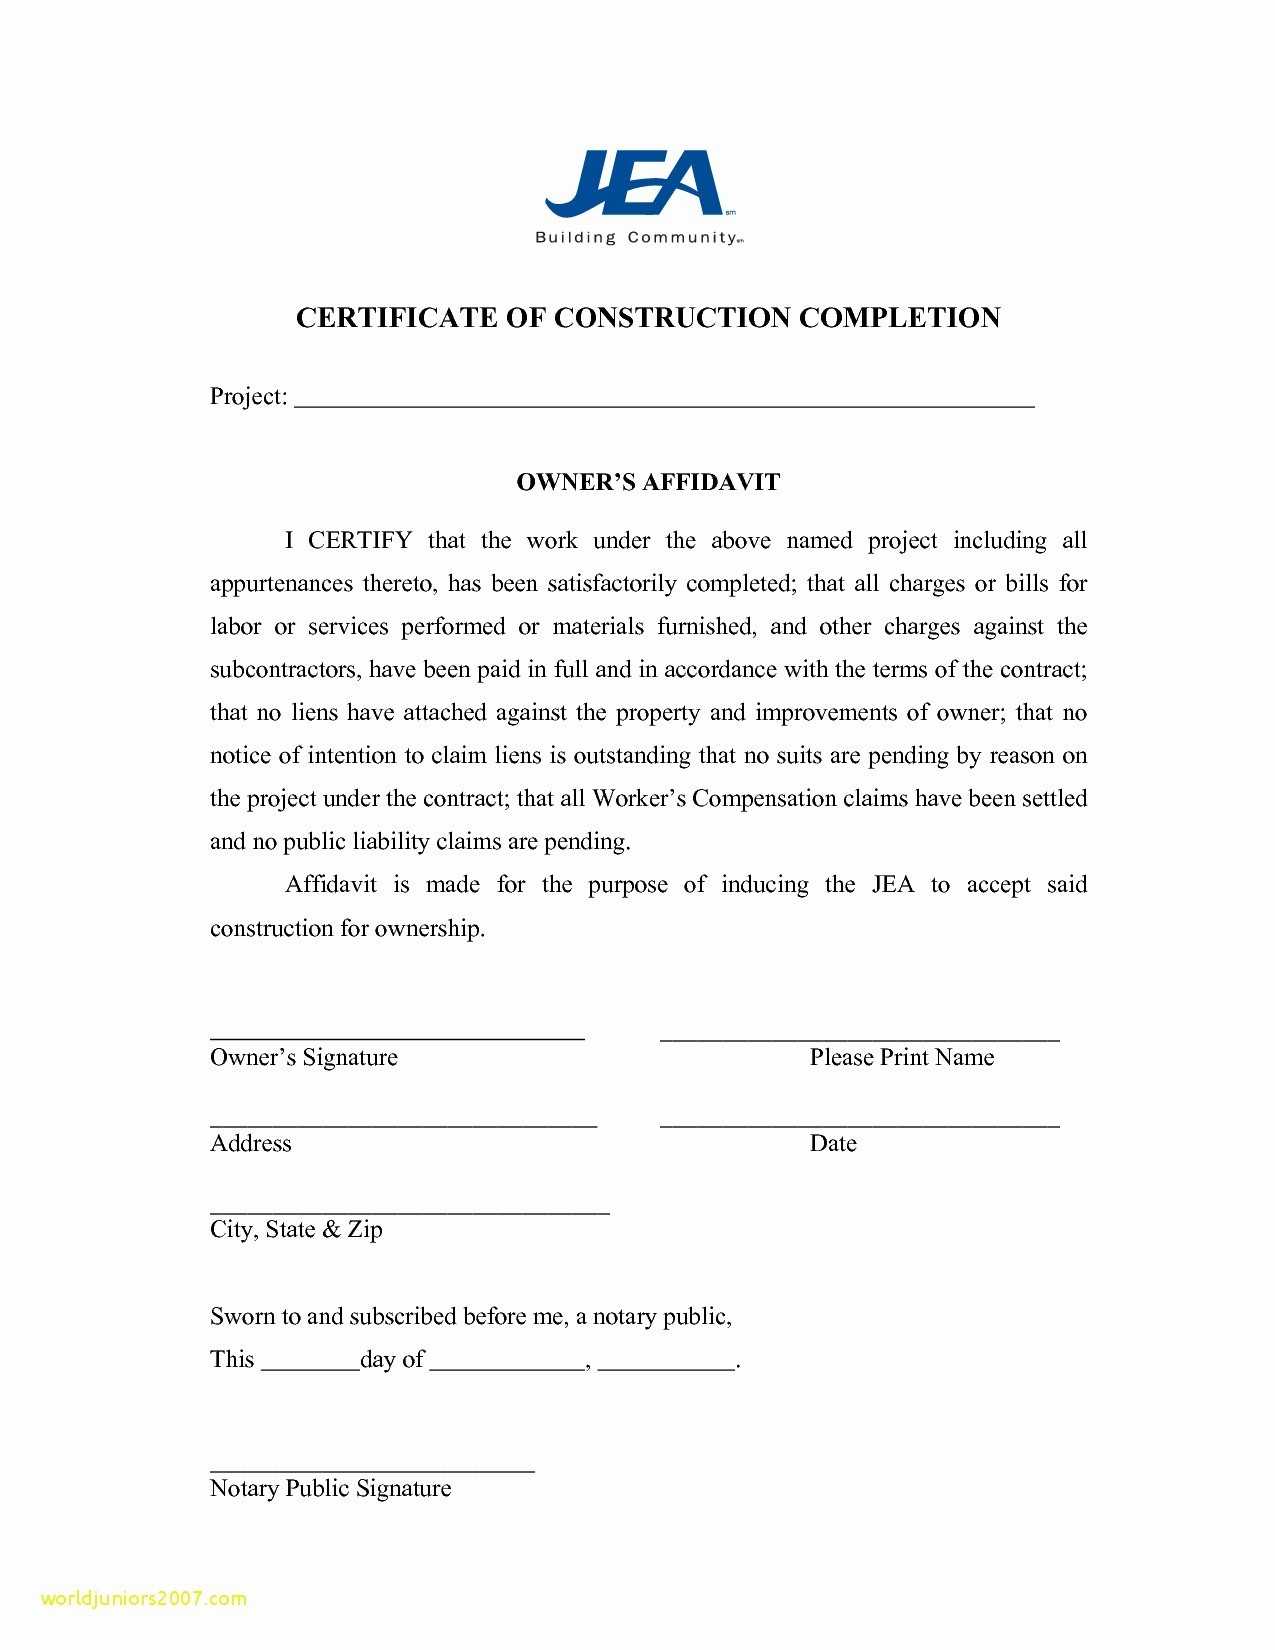 Letter Of Substantial Completion Template Examples | Letter With Jct Practical Completion Certificate Template